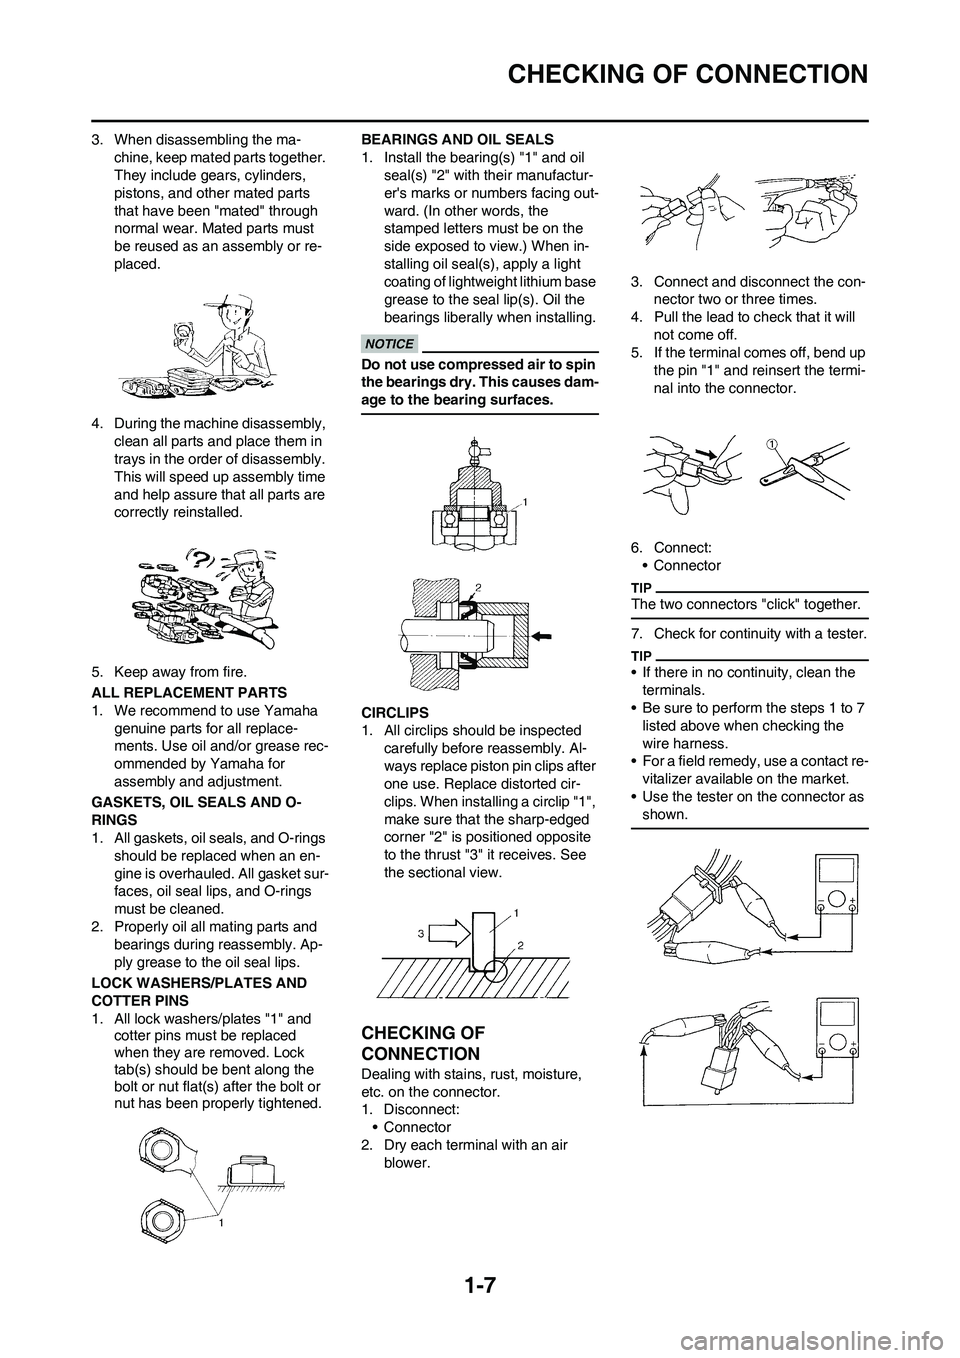 YAMAHA WR 450F 2011  Owners Manual 
1-7
CHECKING OF CONNECTION
3. When disassembling the ma-chine, keep mated parts together. 
They include gears, cylinders, 
pistons, and other mated parts 
that have been "mated" through 
normal wear.